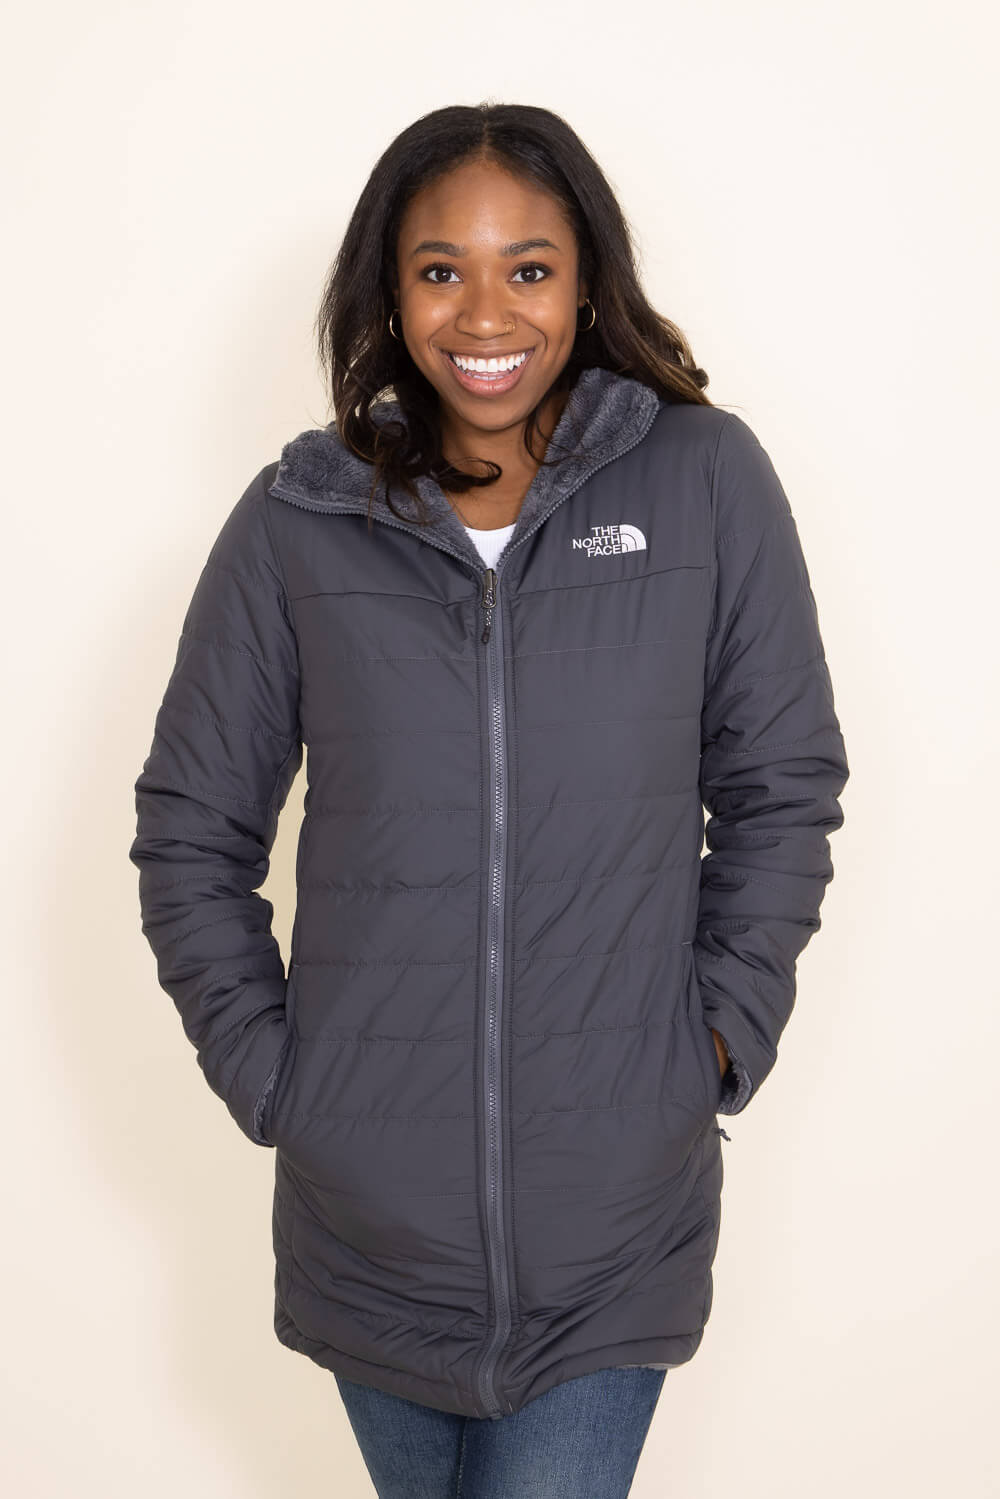 The North Face Mossbud Insulated Reversible Parka Coat for Women